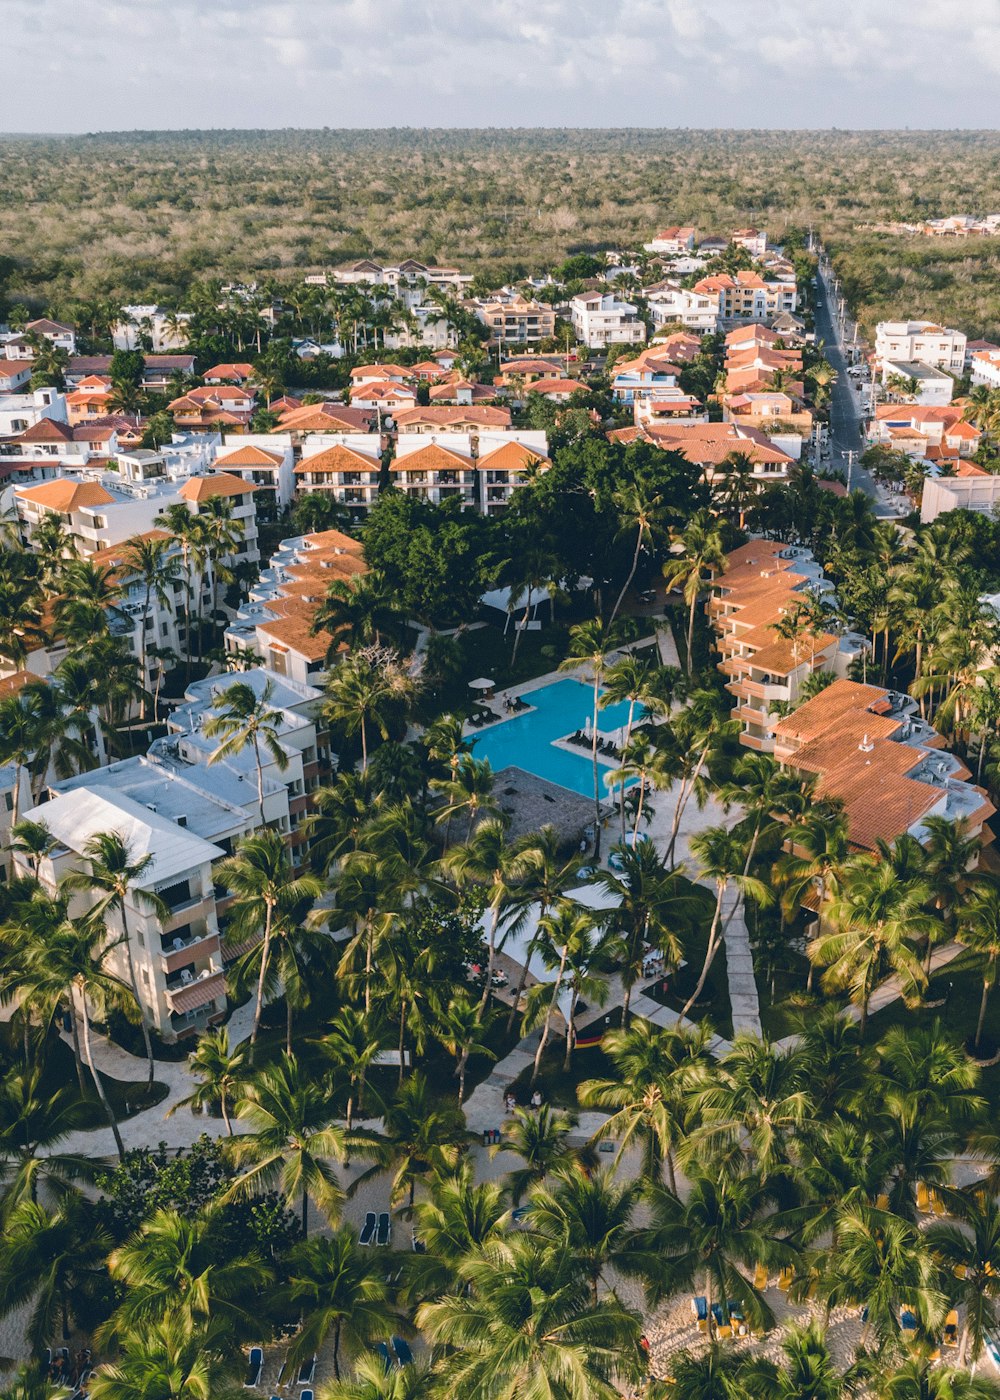 an aerial view of a resort surrounded by palm trees